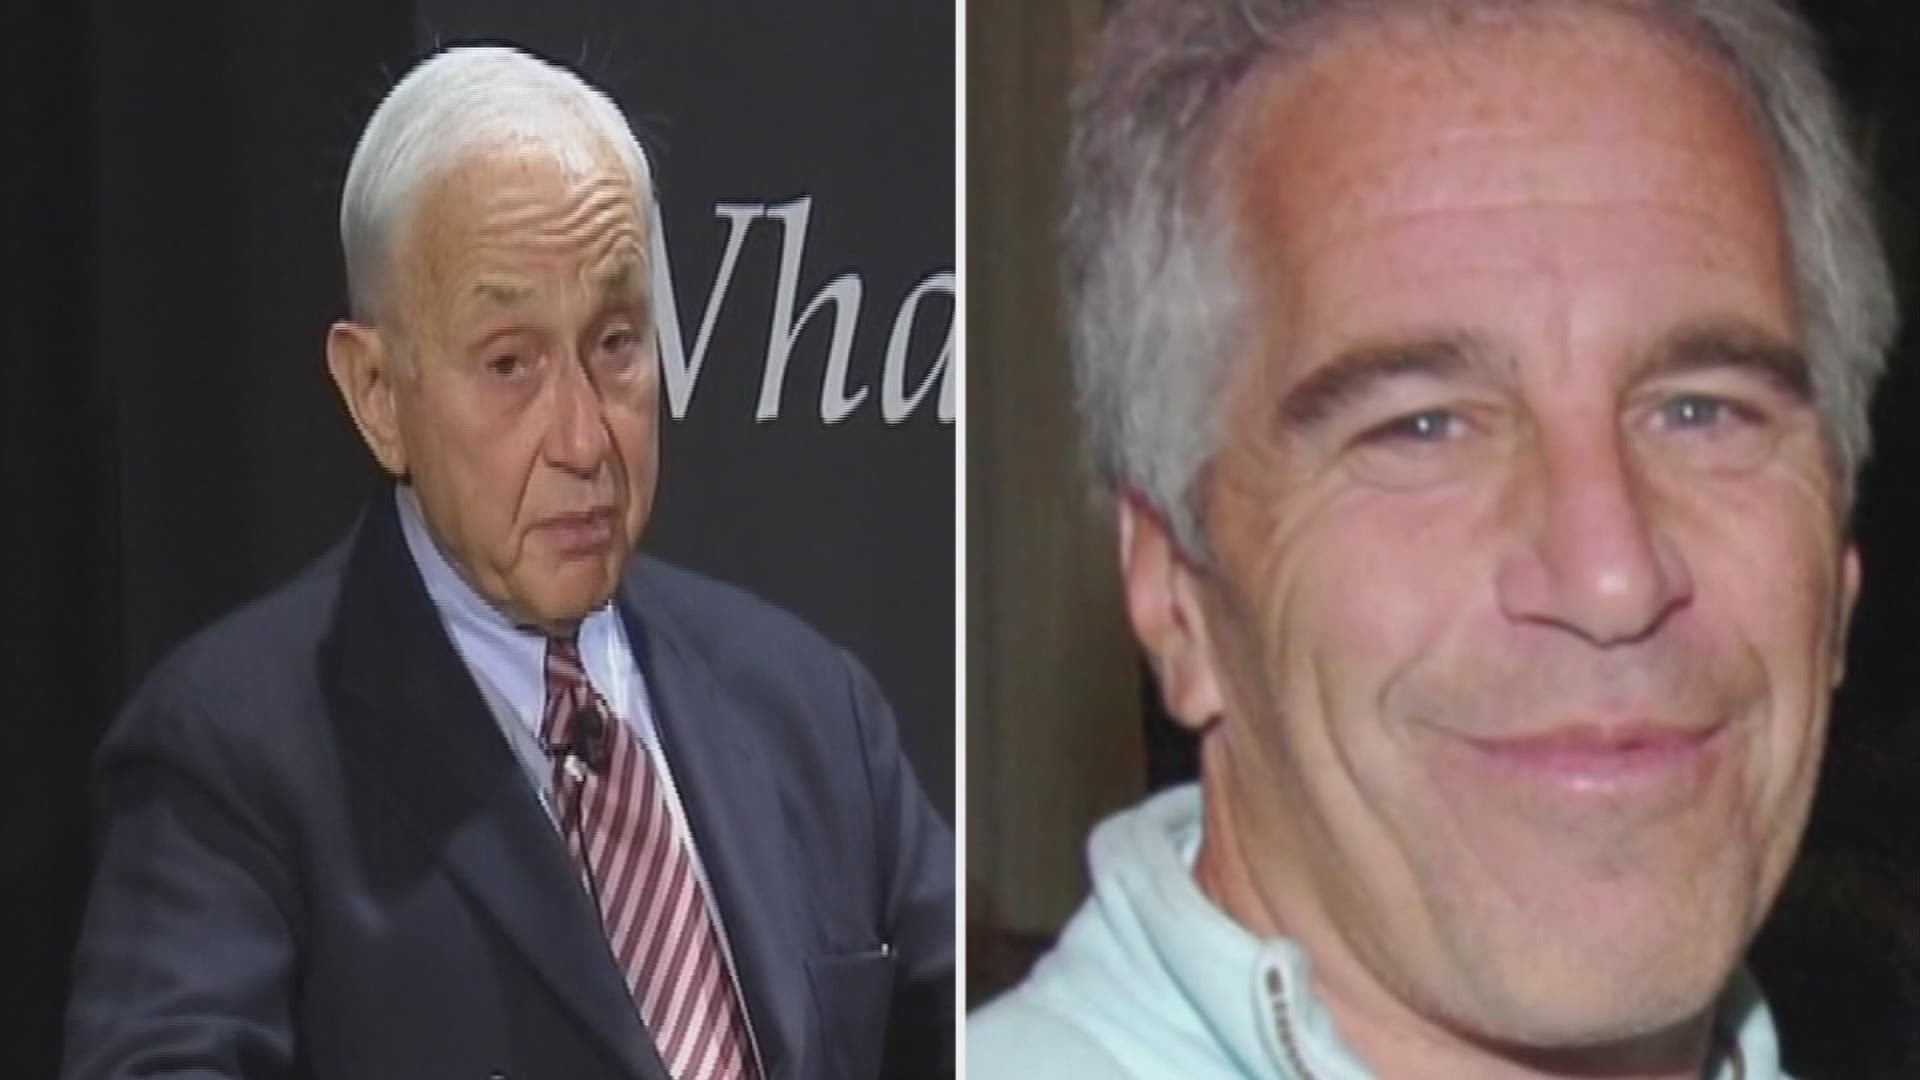 The complaint was filed by a current L-Brands shareholder regarding Wexner's ties to Jeffrey Epstein